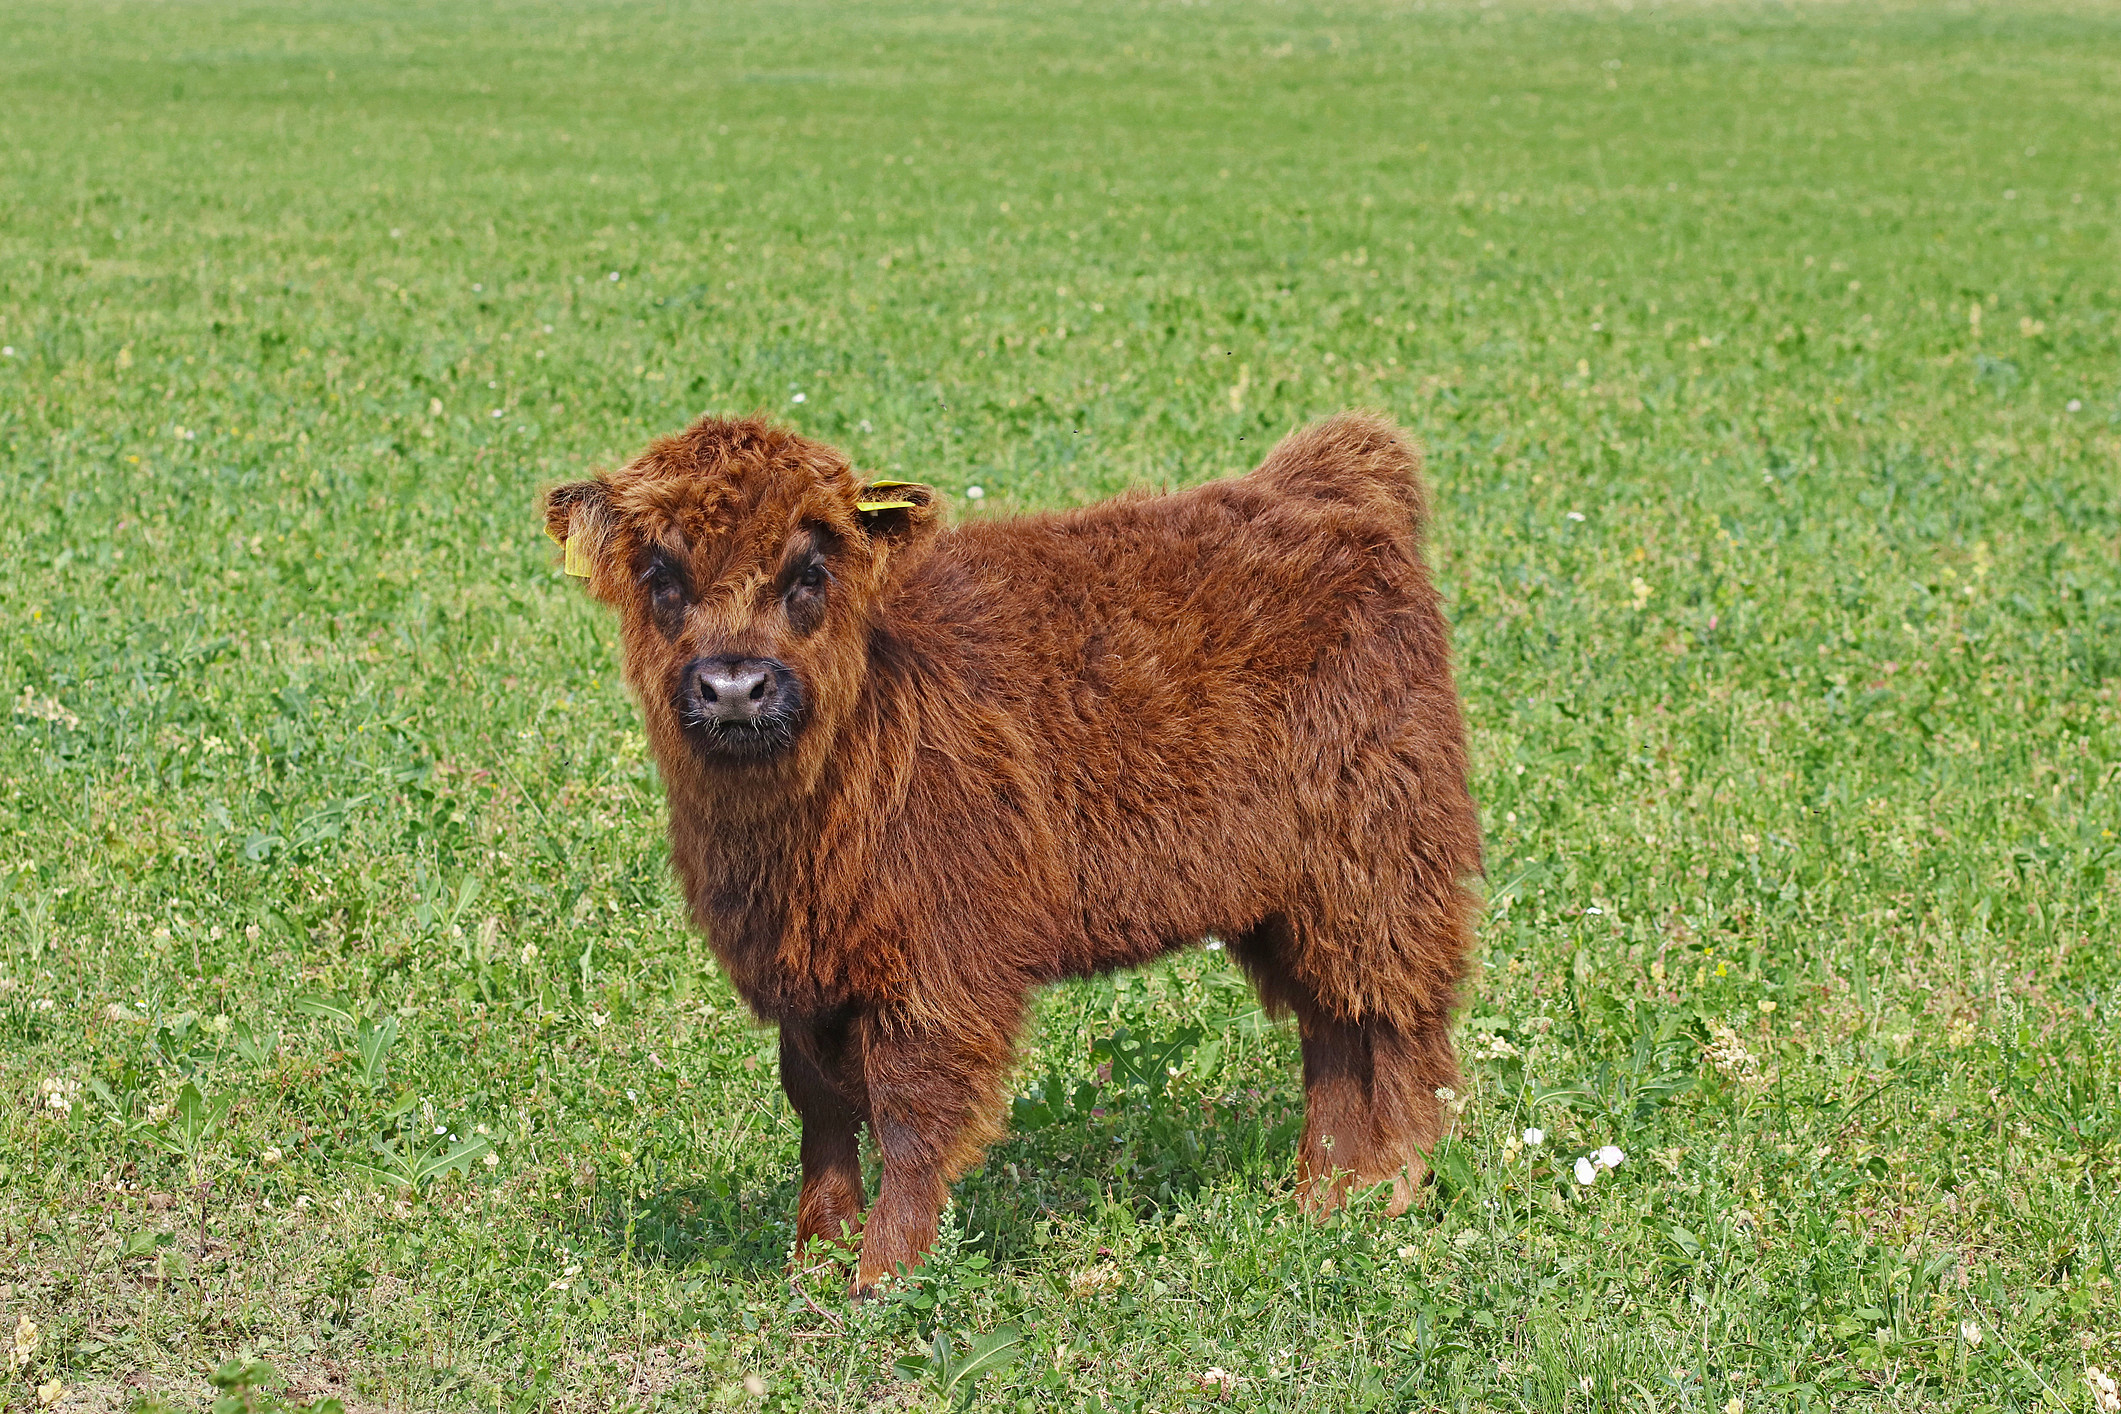 miniature highland cows for sale